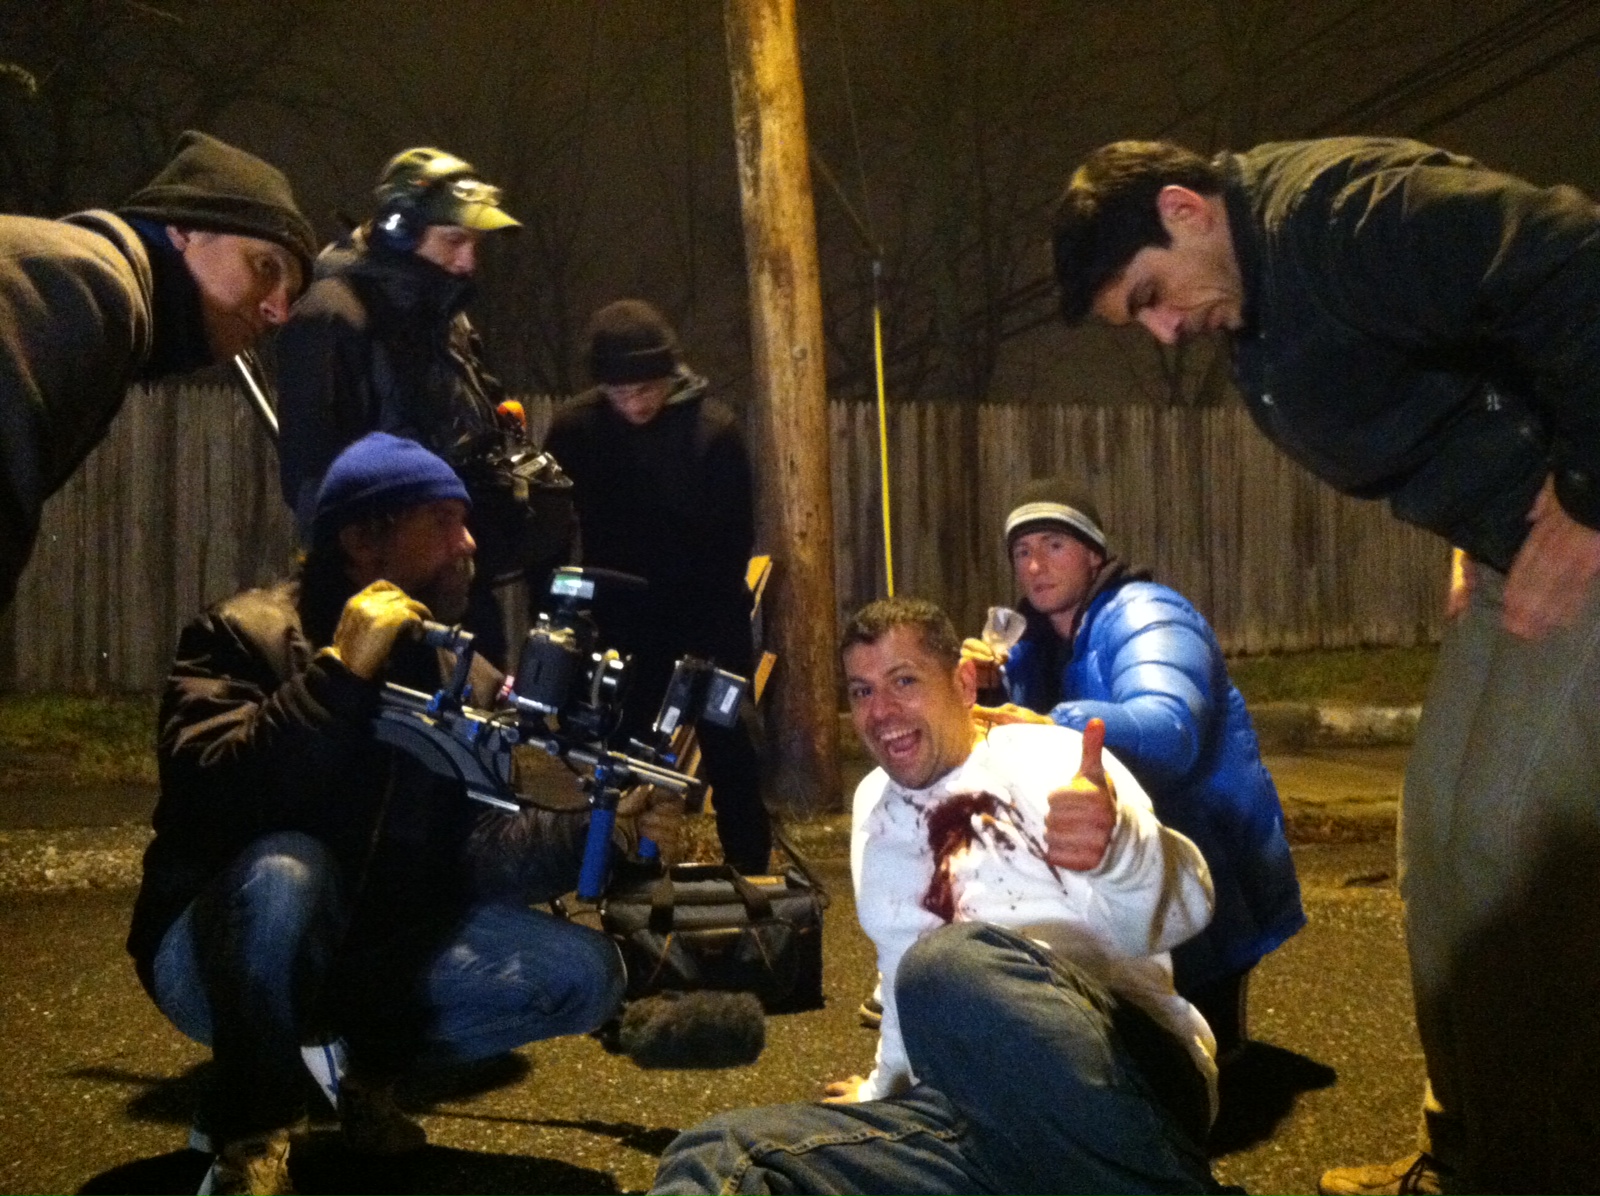 Between takes on Fatal Encounters